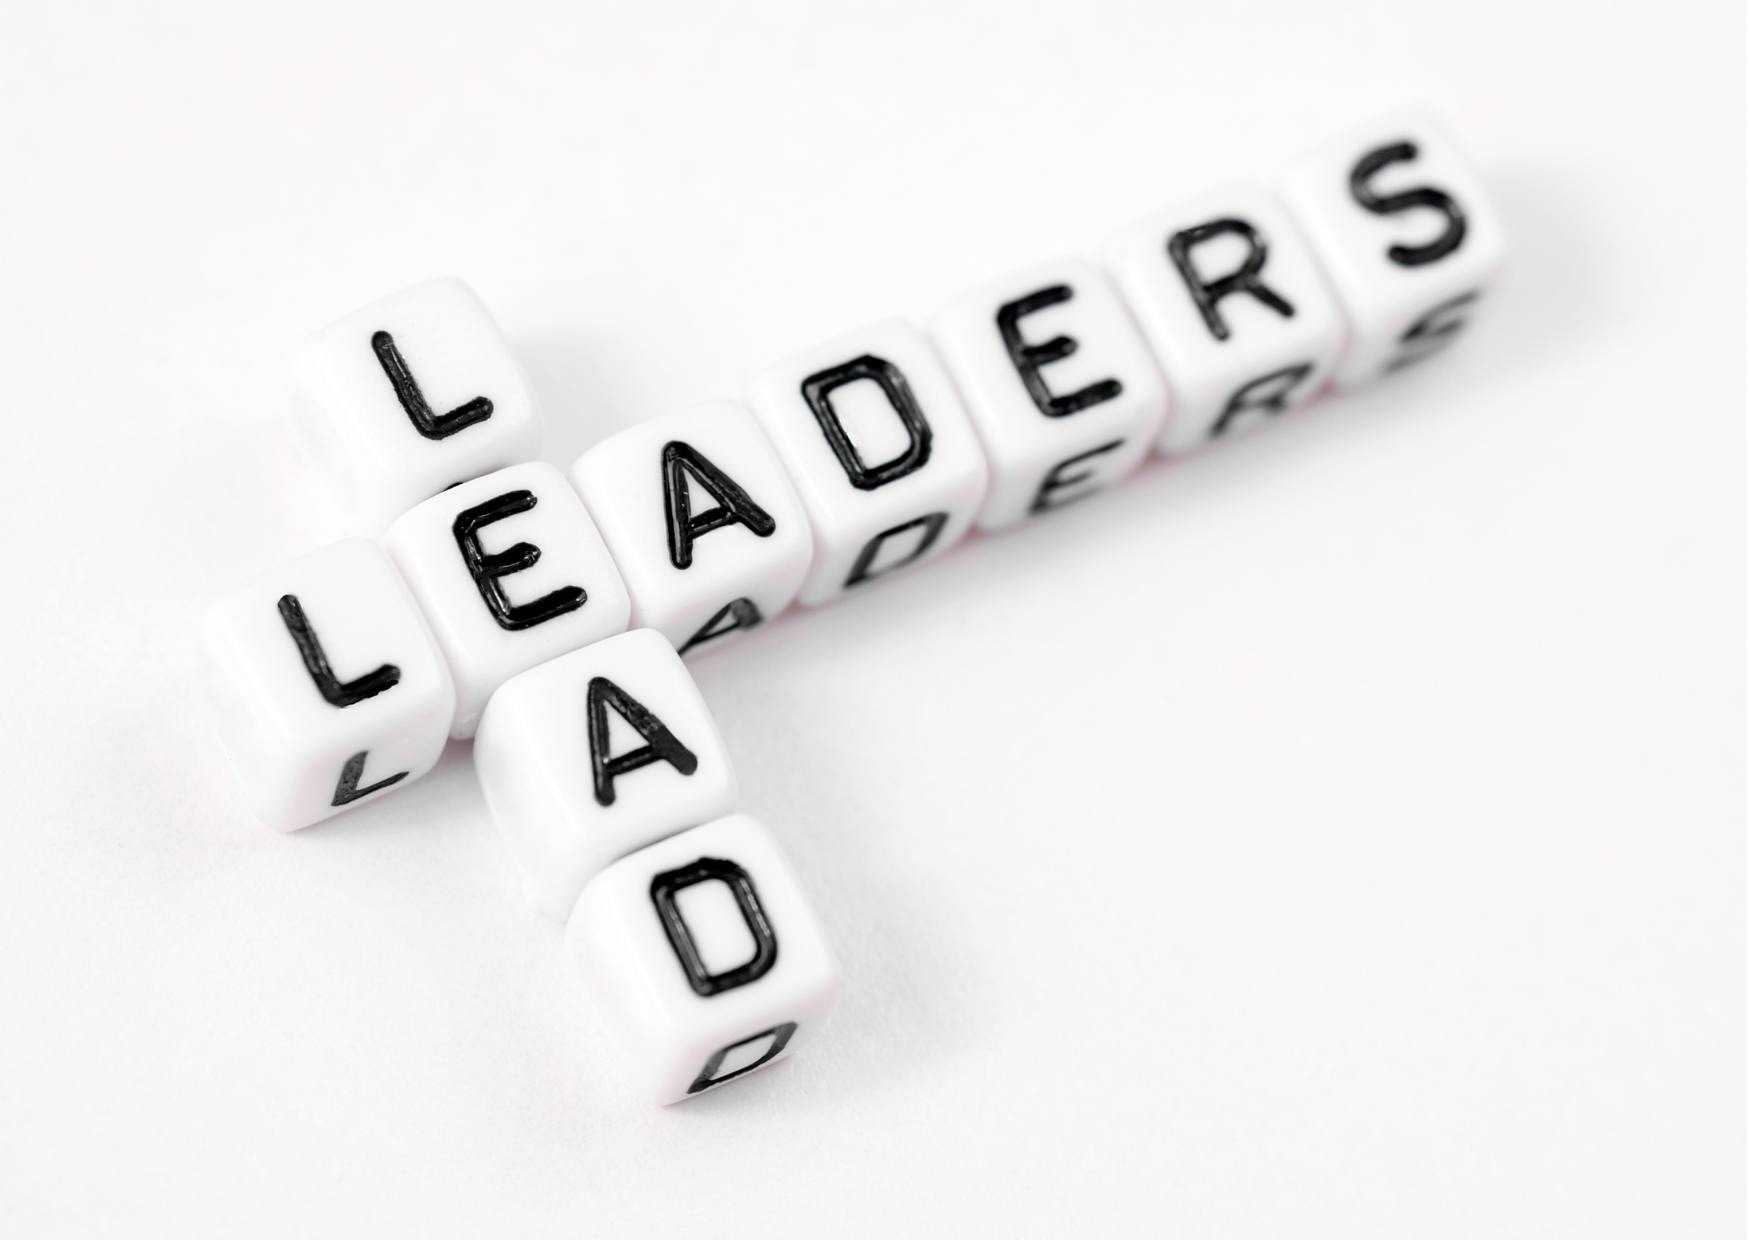 Leaders in workplace